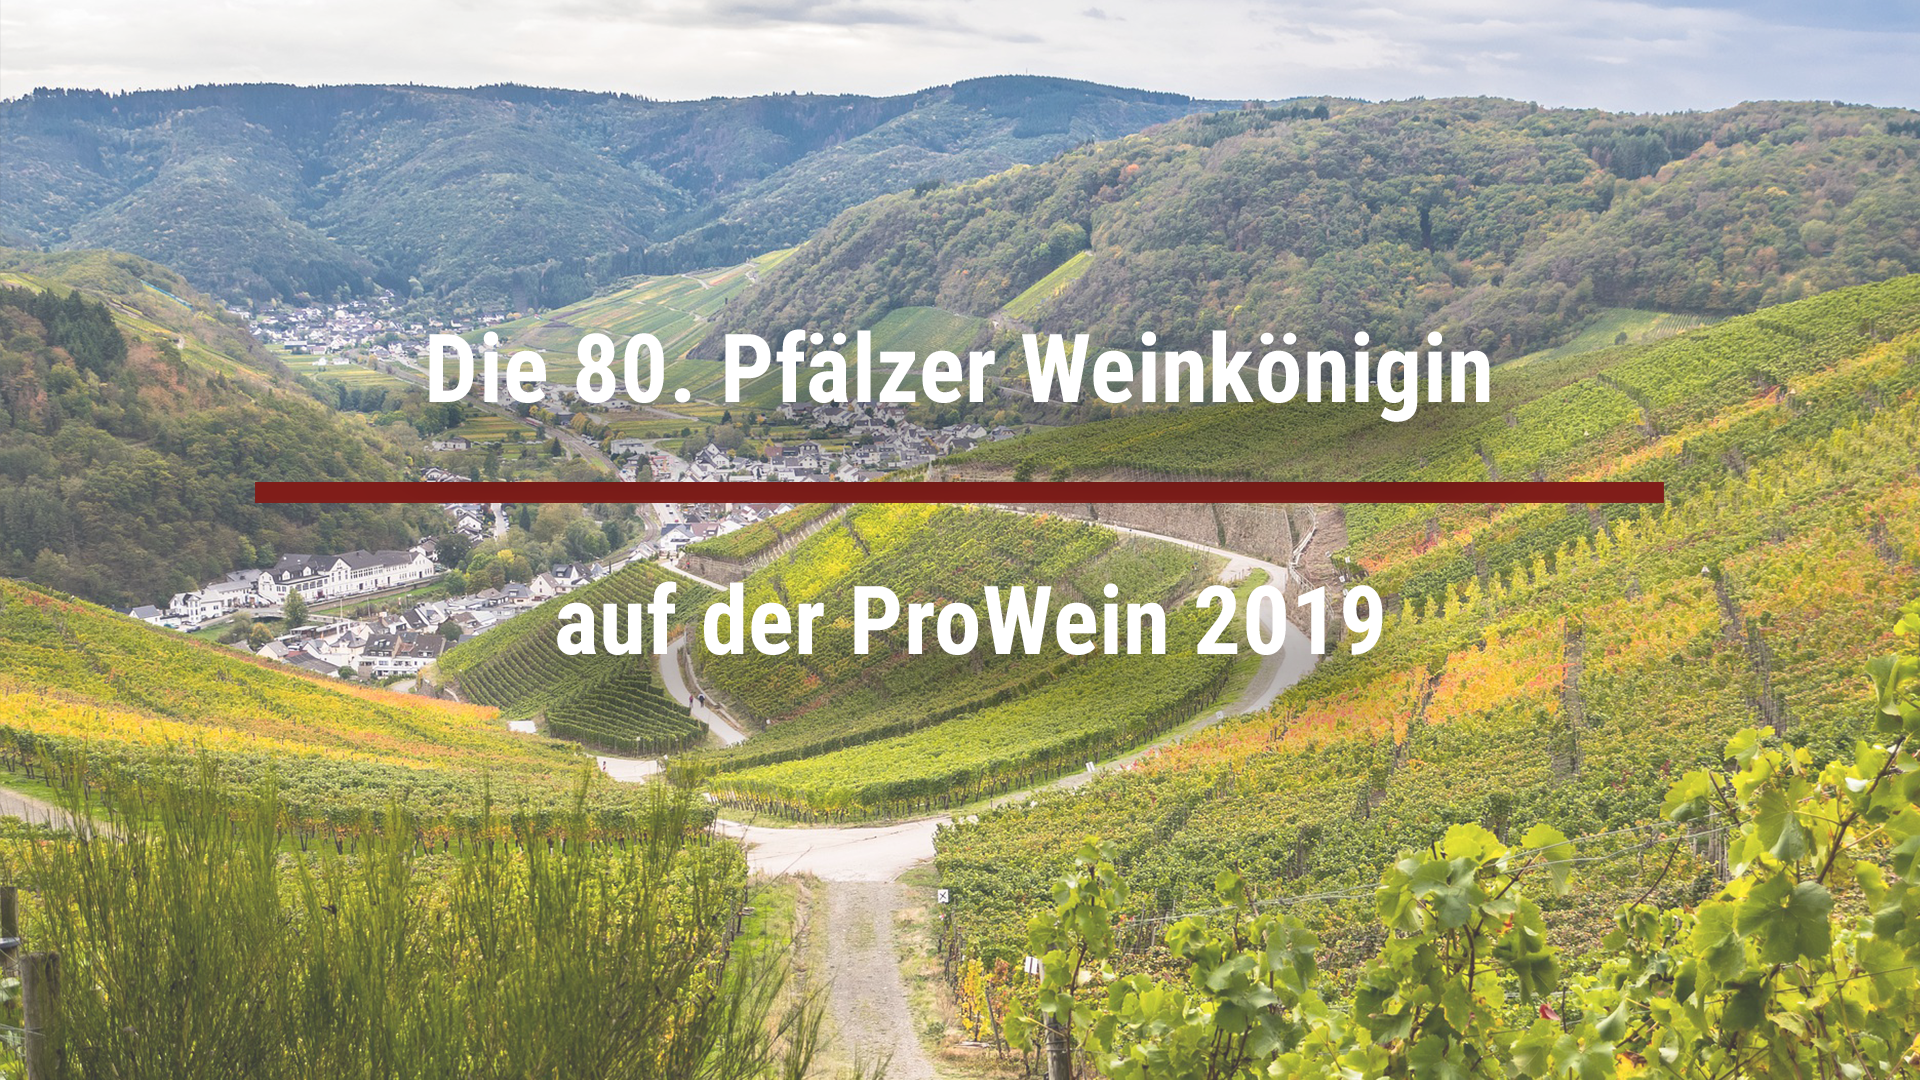 The 80th Palatinate Wine Queen at ProWein 2019